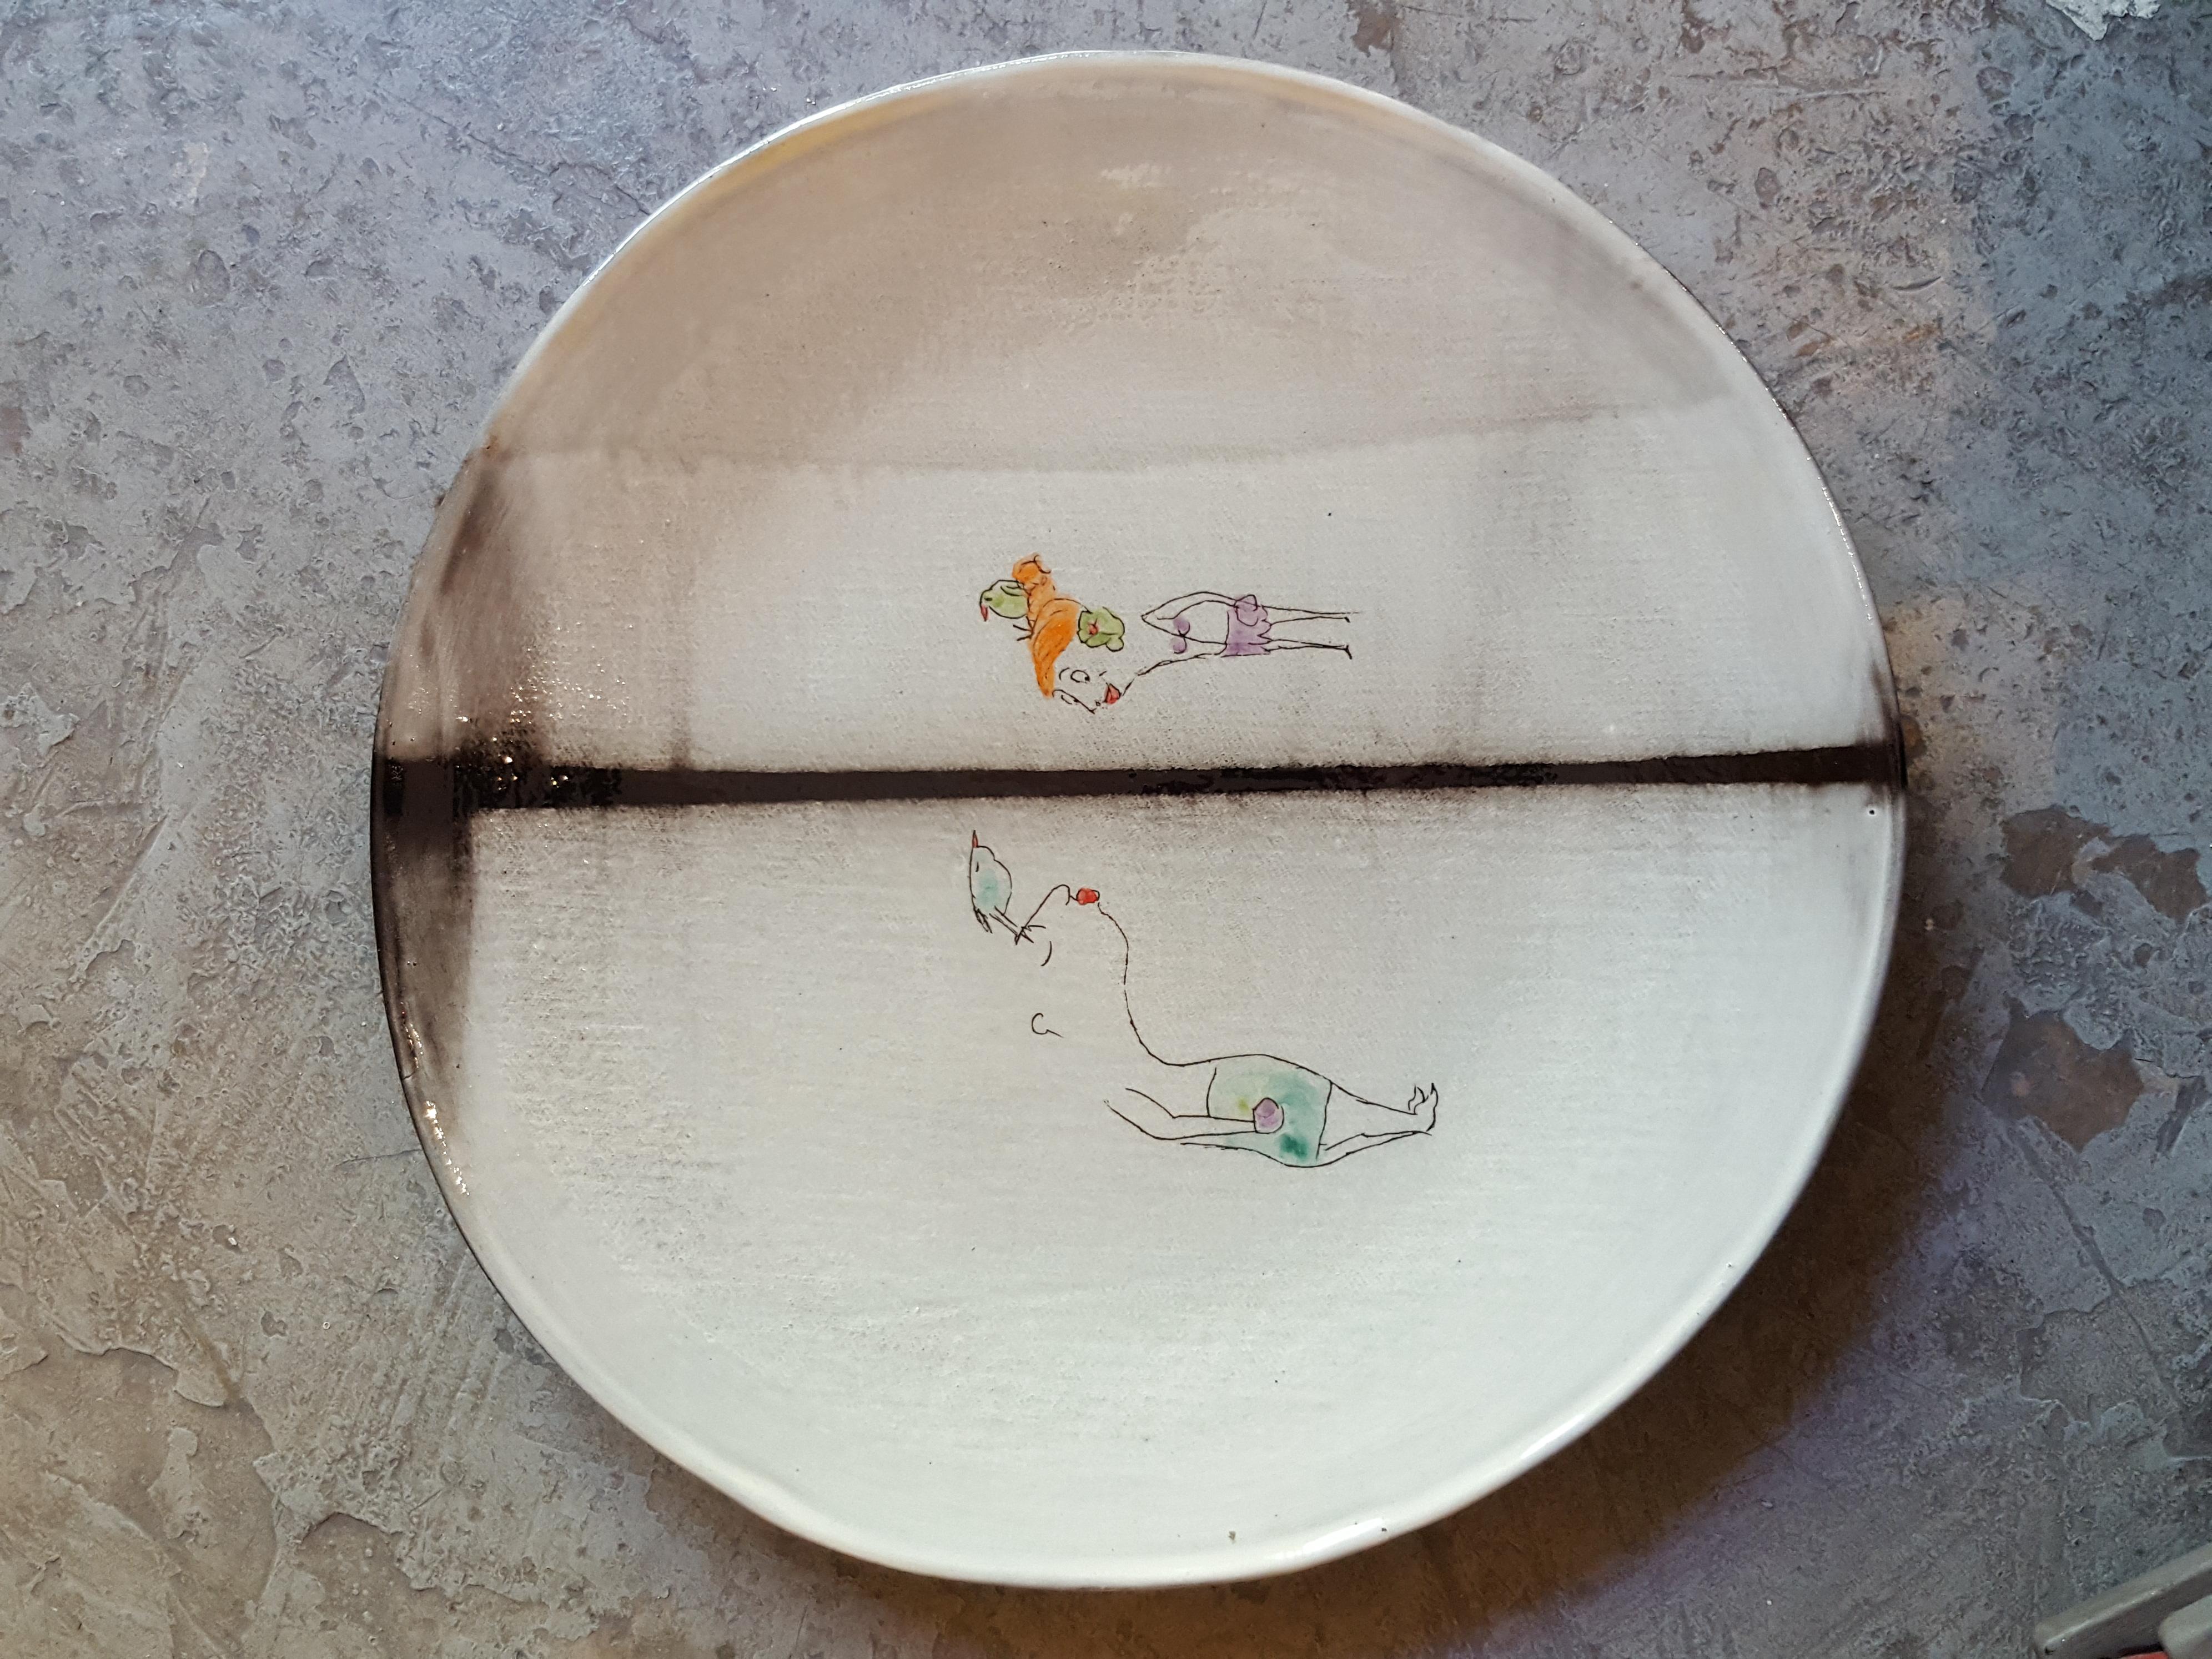 Other Unique French Artist's Ceramic Dinner Plates